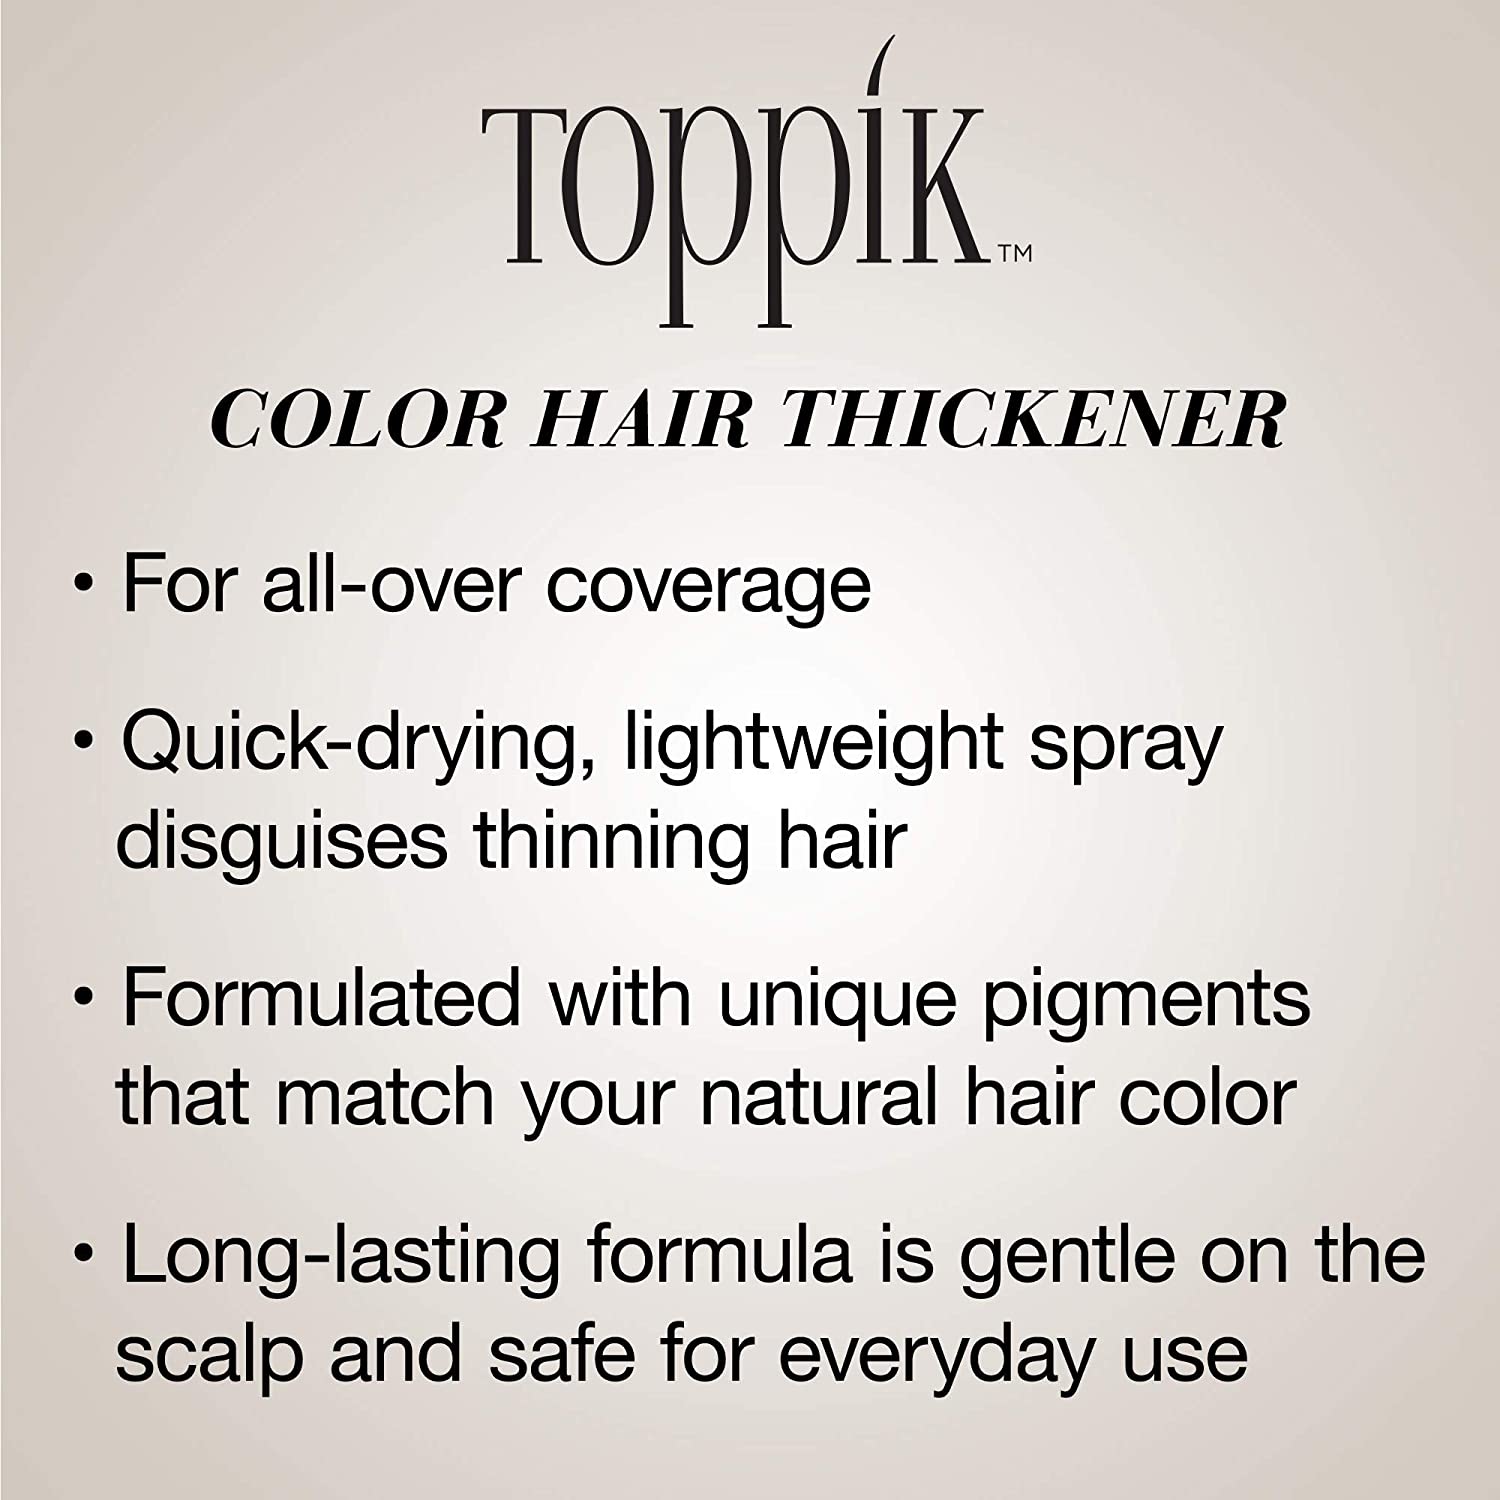 New Toppik Colored Hair Thickener